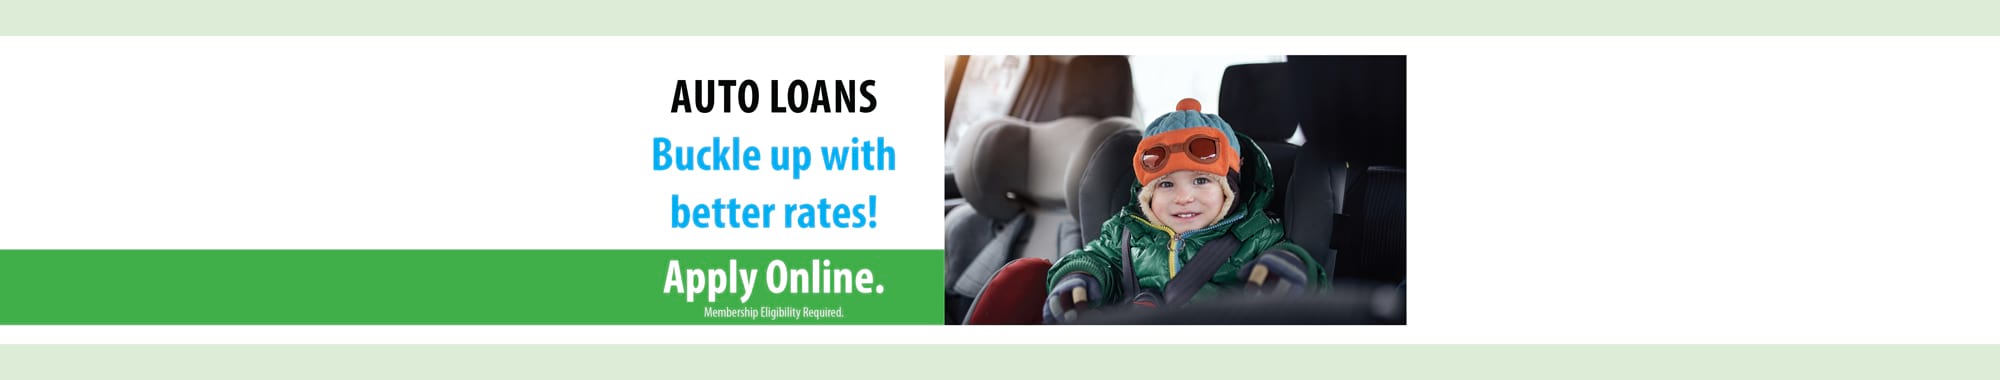 AUTO LOANS - Buckle up with better rates! Apply Online. Membership Eligibility Required.